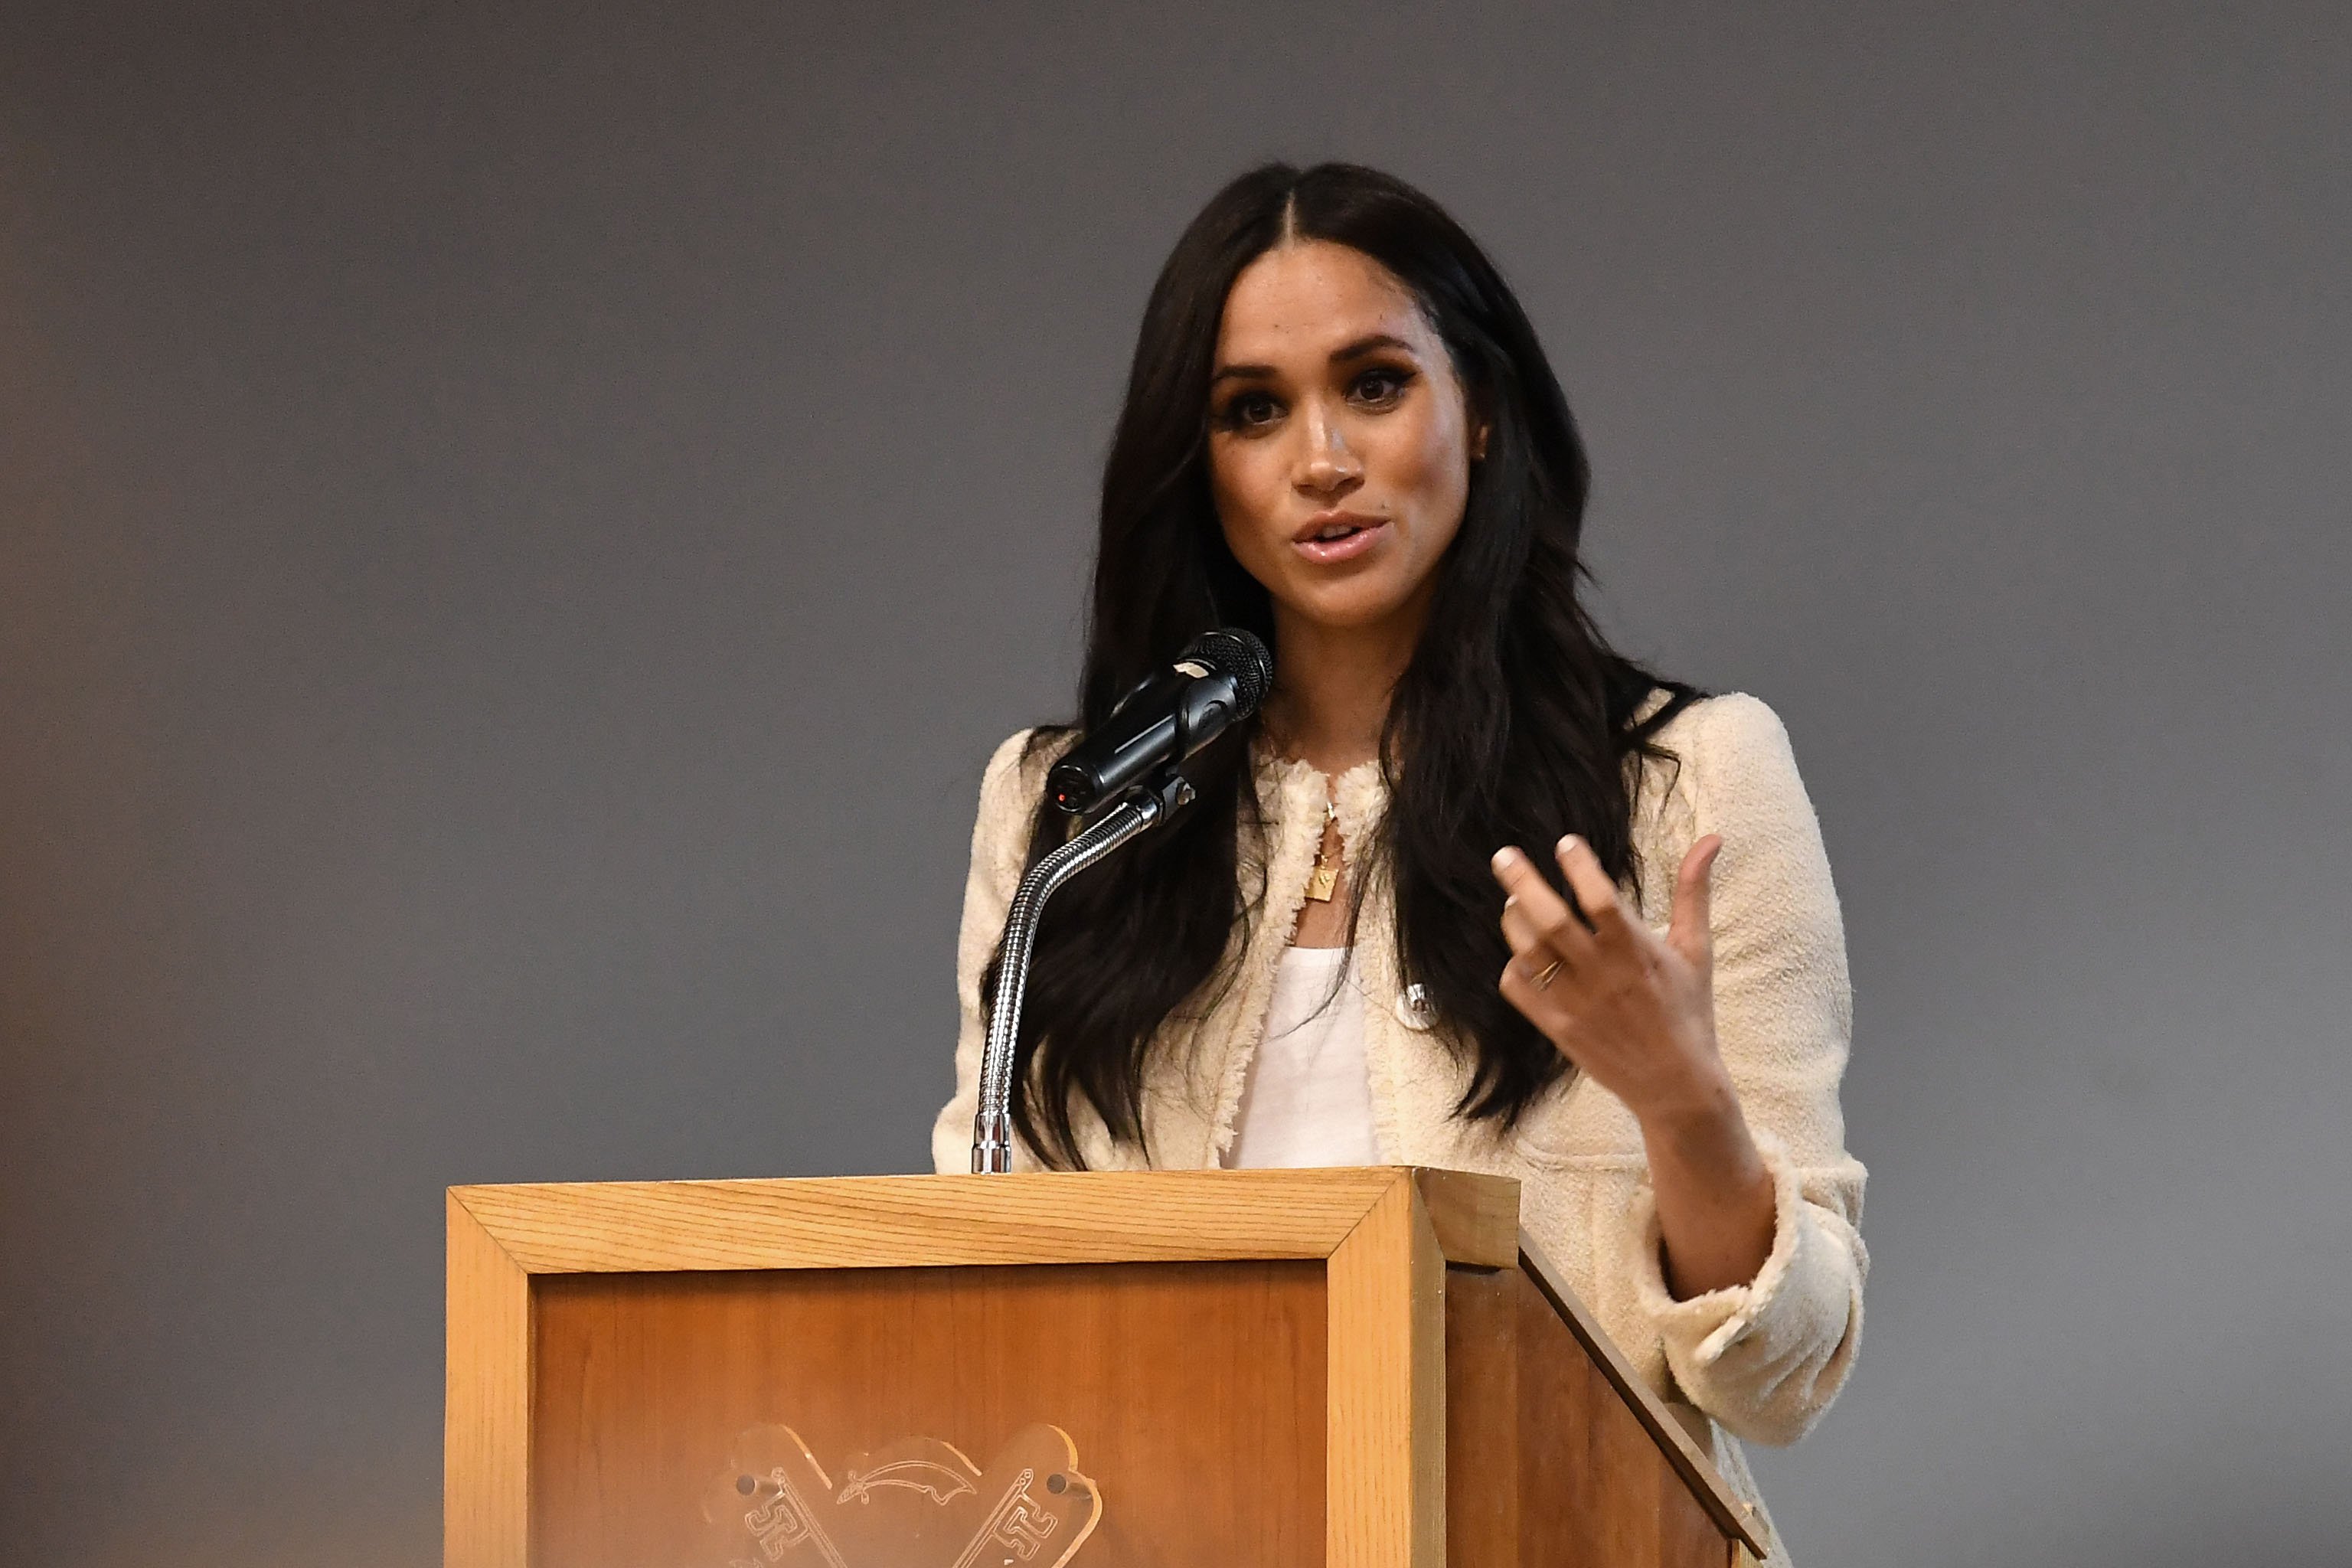 Meghan Markle speaking onstage during a special school assembly ahead of International Women’s Day in 2020